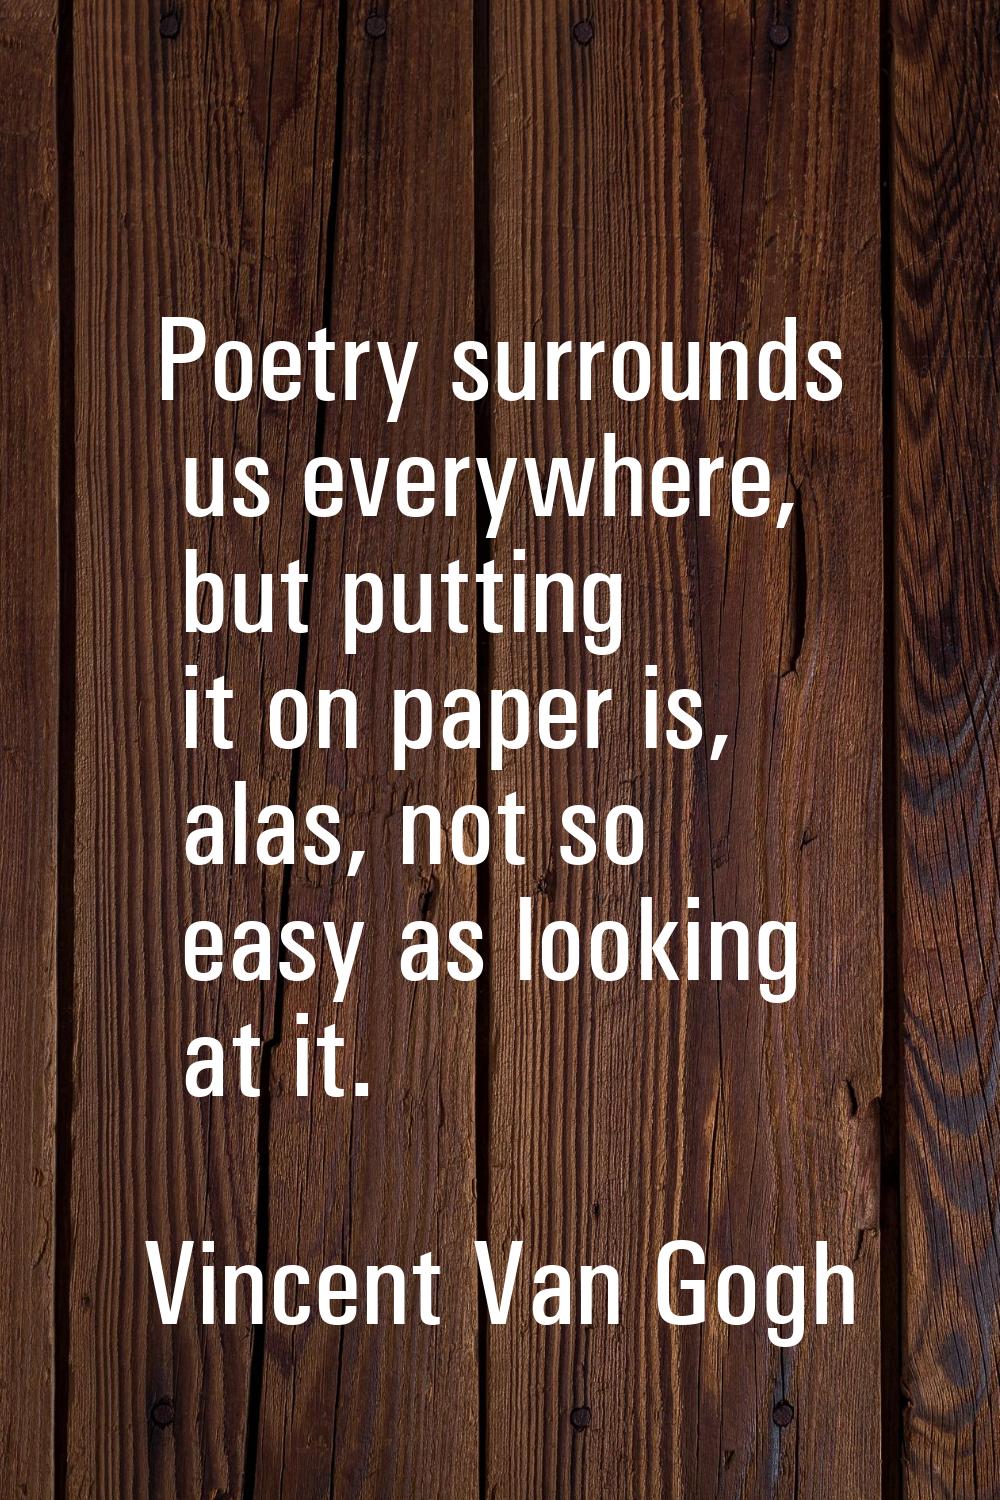 Poetry surrounds us everywhere, but putting it on paper is, alas, not so easy as looking at it.